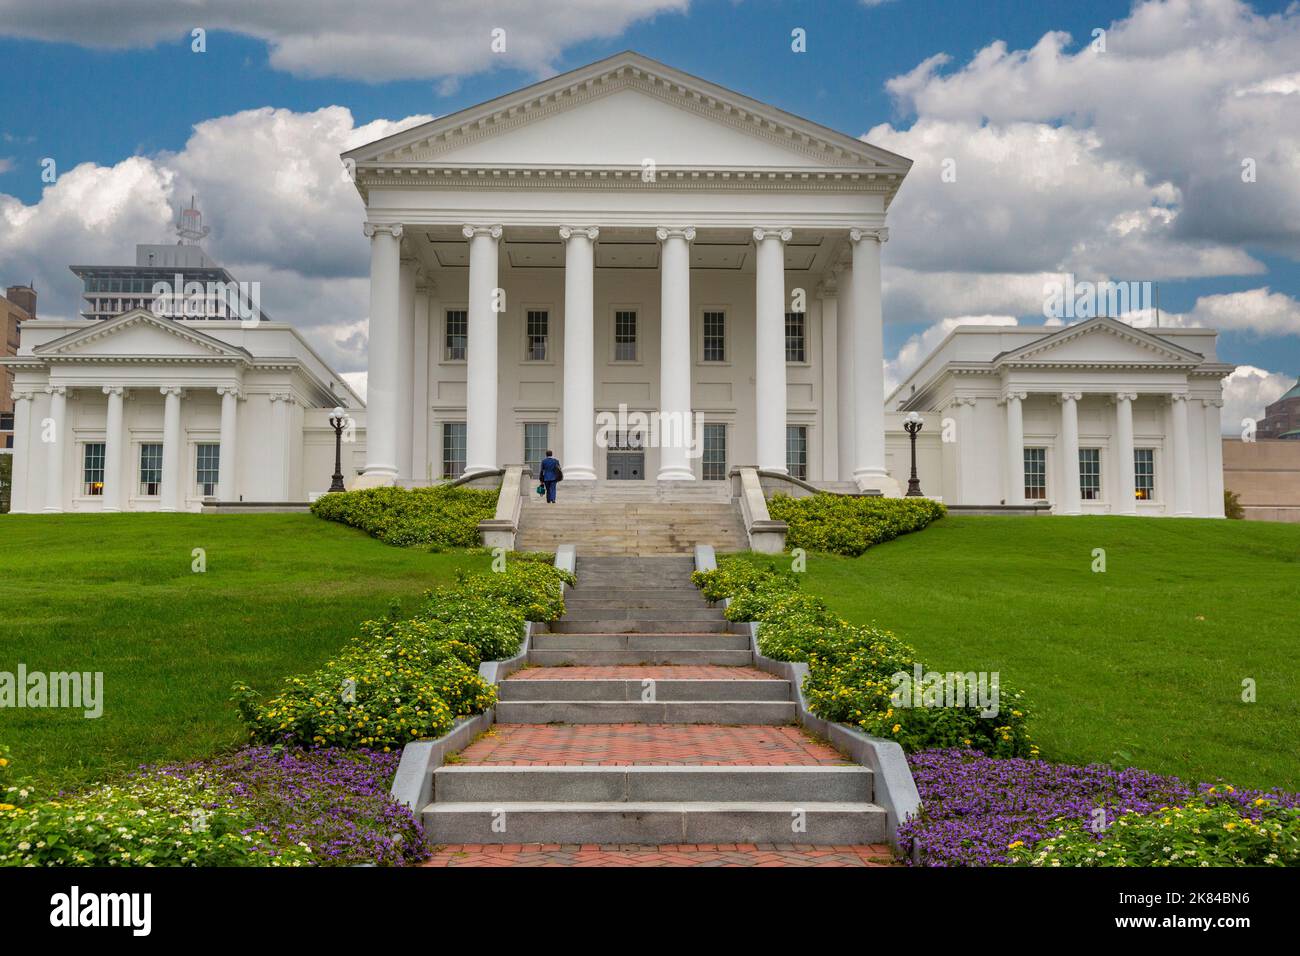 Richmond, Virginia.  The State Capitol Building.  Architectural Style:  Early Republic, Palladian Stock Photo